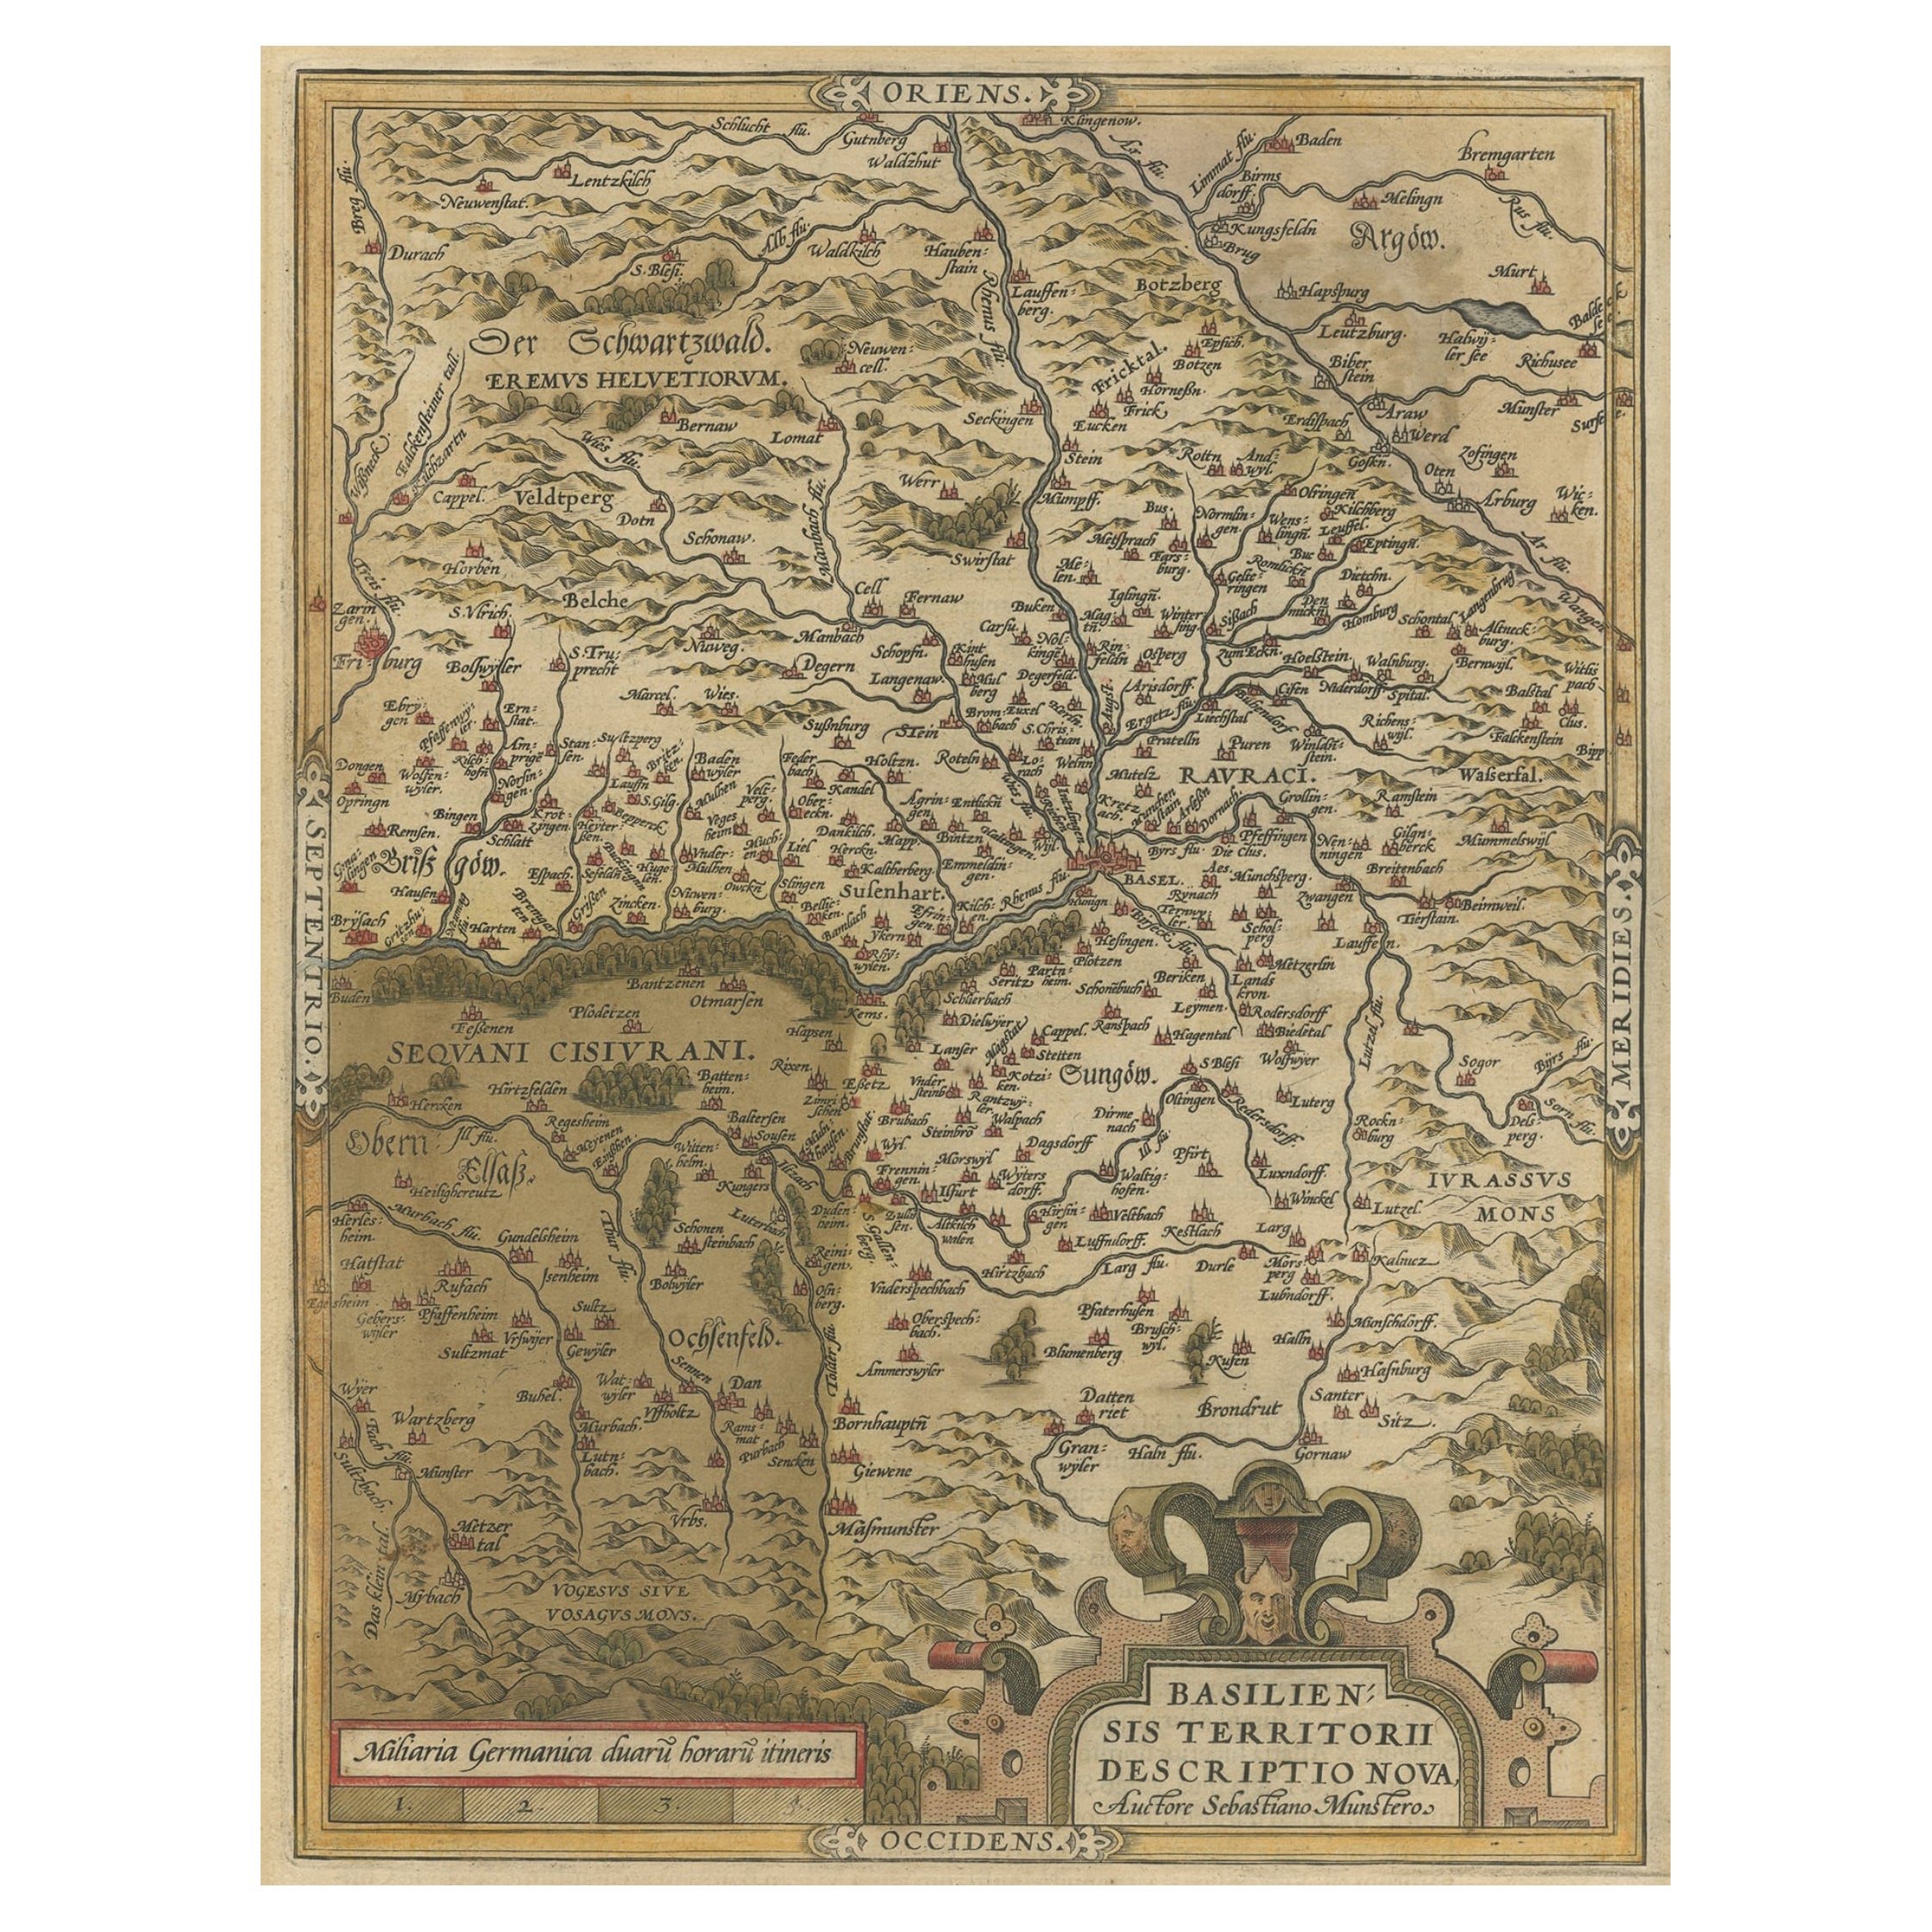 Very Old Original Hand-Colored Map of the Basel Region, Switzerland, Ca.1578